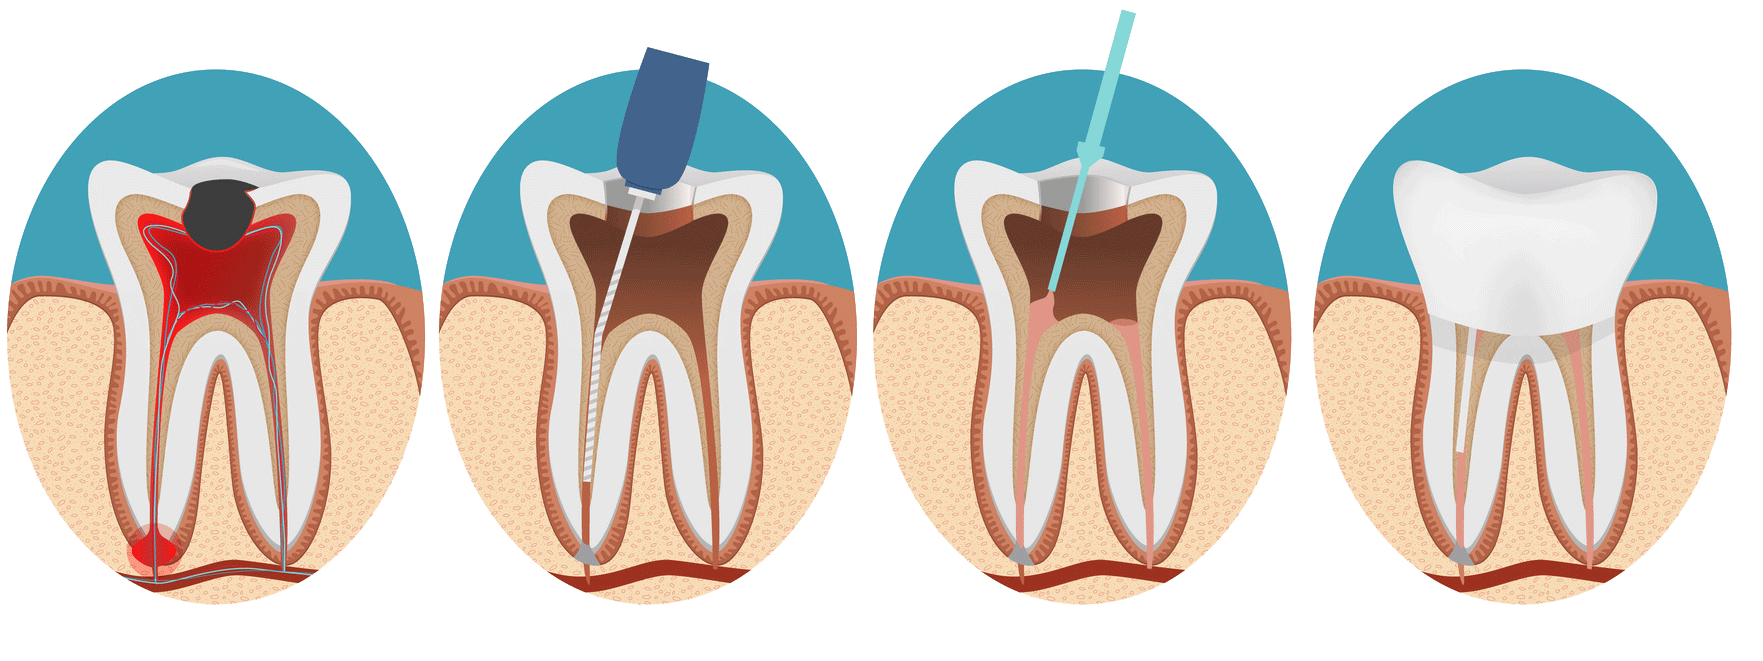 Advantages of root canal treatment - Well Articles